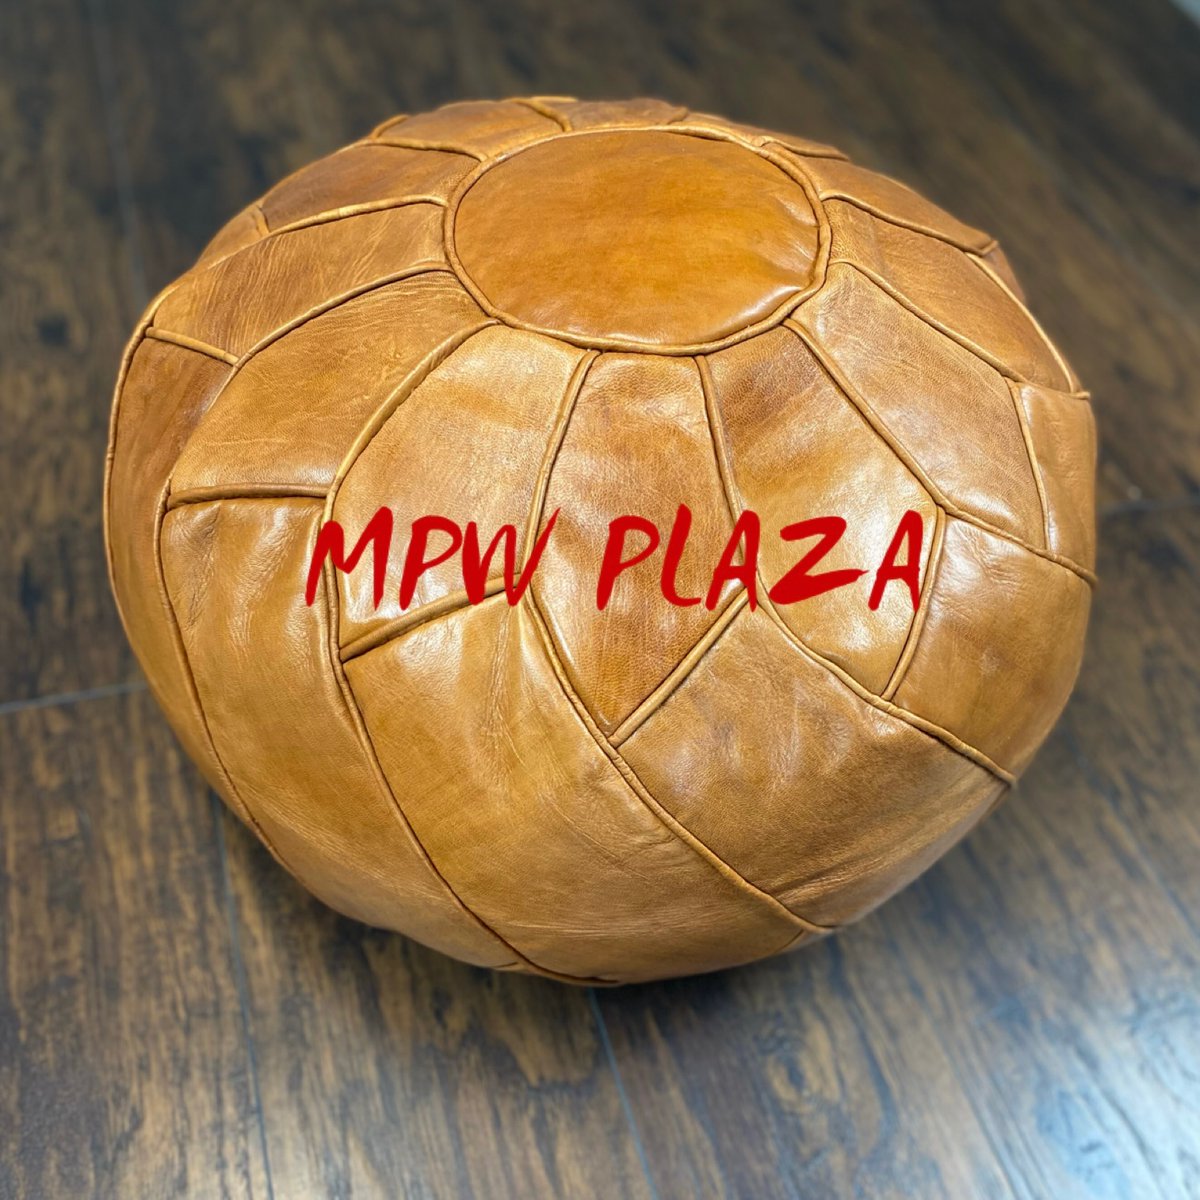 🌹 Treat yourself to a Premium MPWplaza Luxury Pouf 🌺 ships from USA🌹
#luxuryhouses #luxurylifestyles #luxurygirl #luxurylivingroom #luxurystyle #luxuryapartments #luxuryshopping #luxuryshoes #luxurybags #luxurycollection #luxurycondos #luxurymansion #luxuryproperty #affiliate